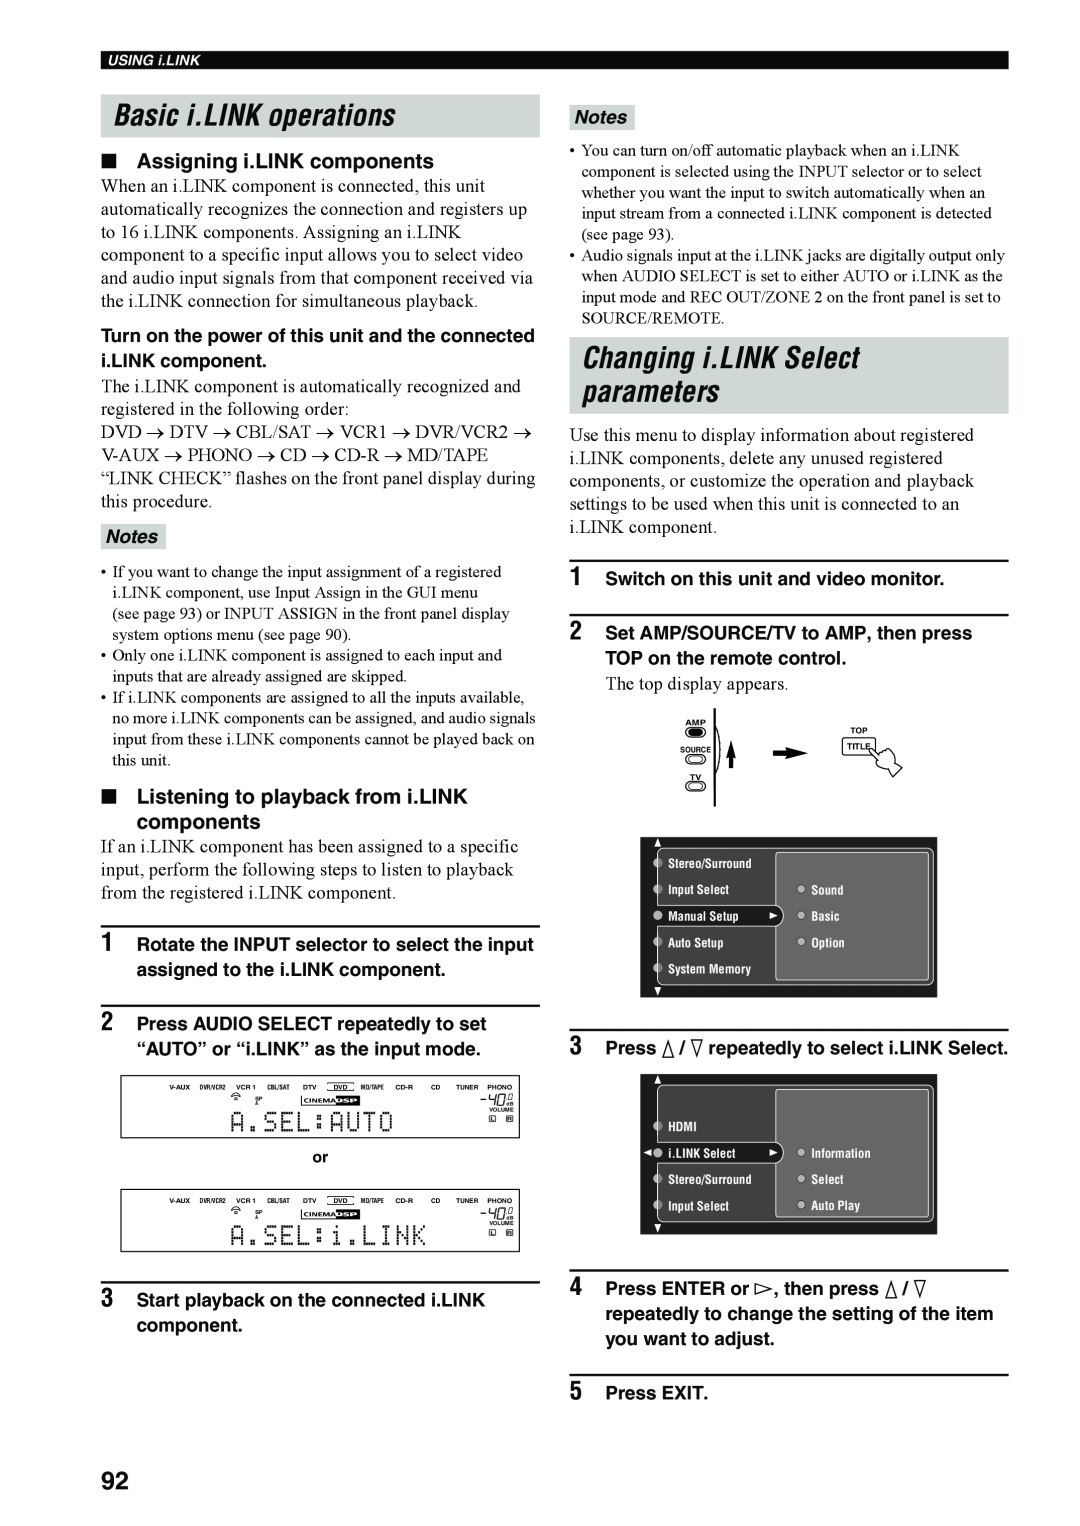 Yamaha RX-V4600 owner manual Basic i.LINK operations, Changing i.LINK Select parameters, A.Selauto, A.SELi.LINK, Press EXIT 